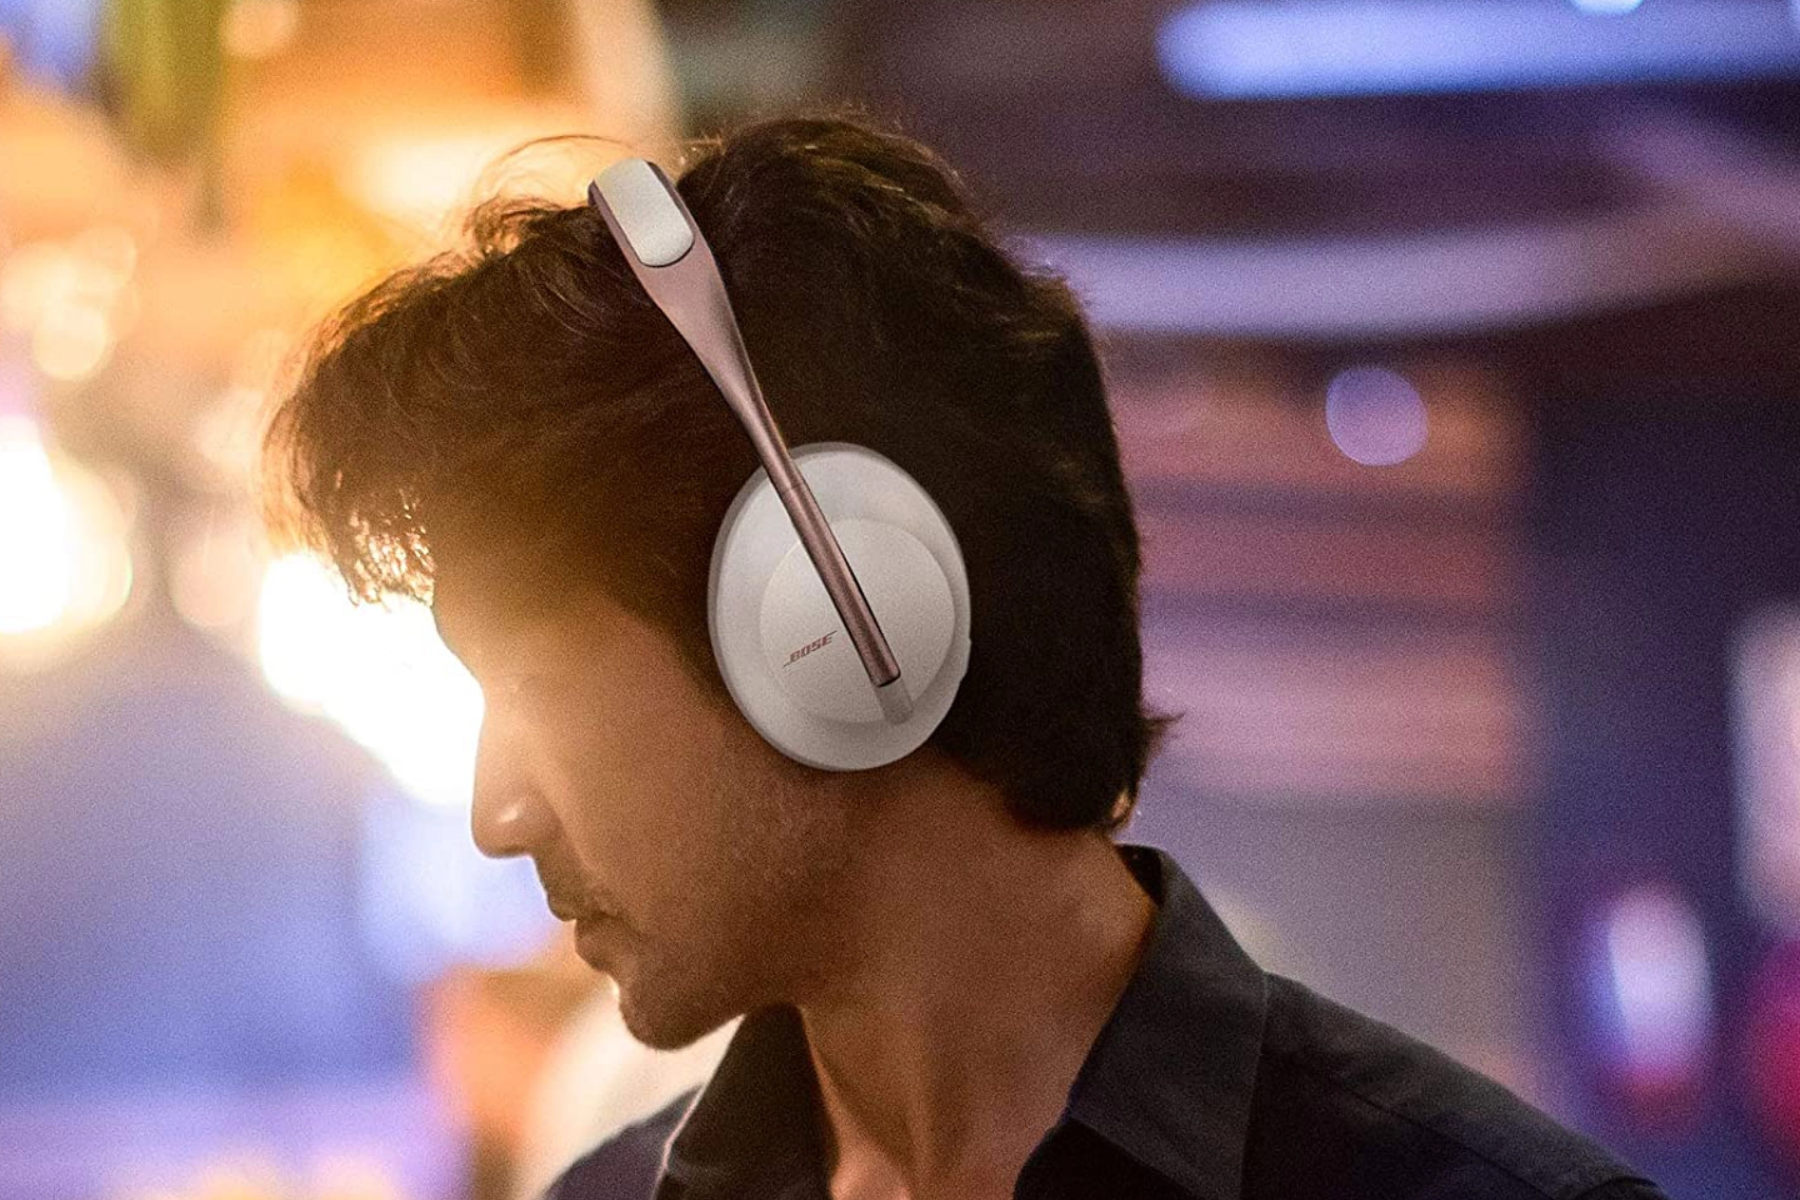 A man poses from the side while wearing Bose headphones